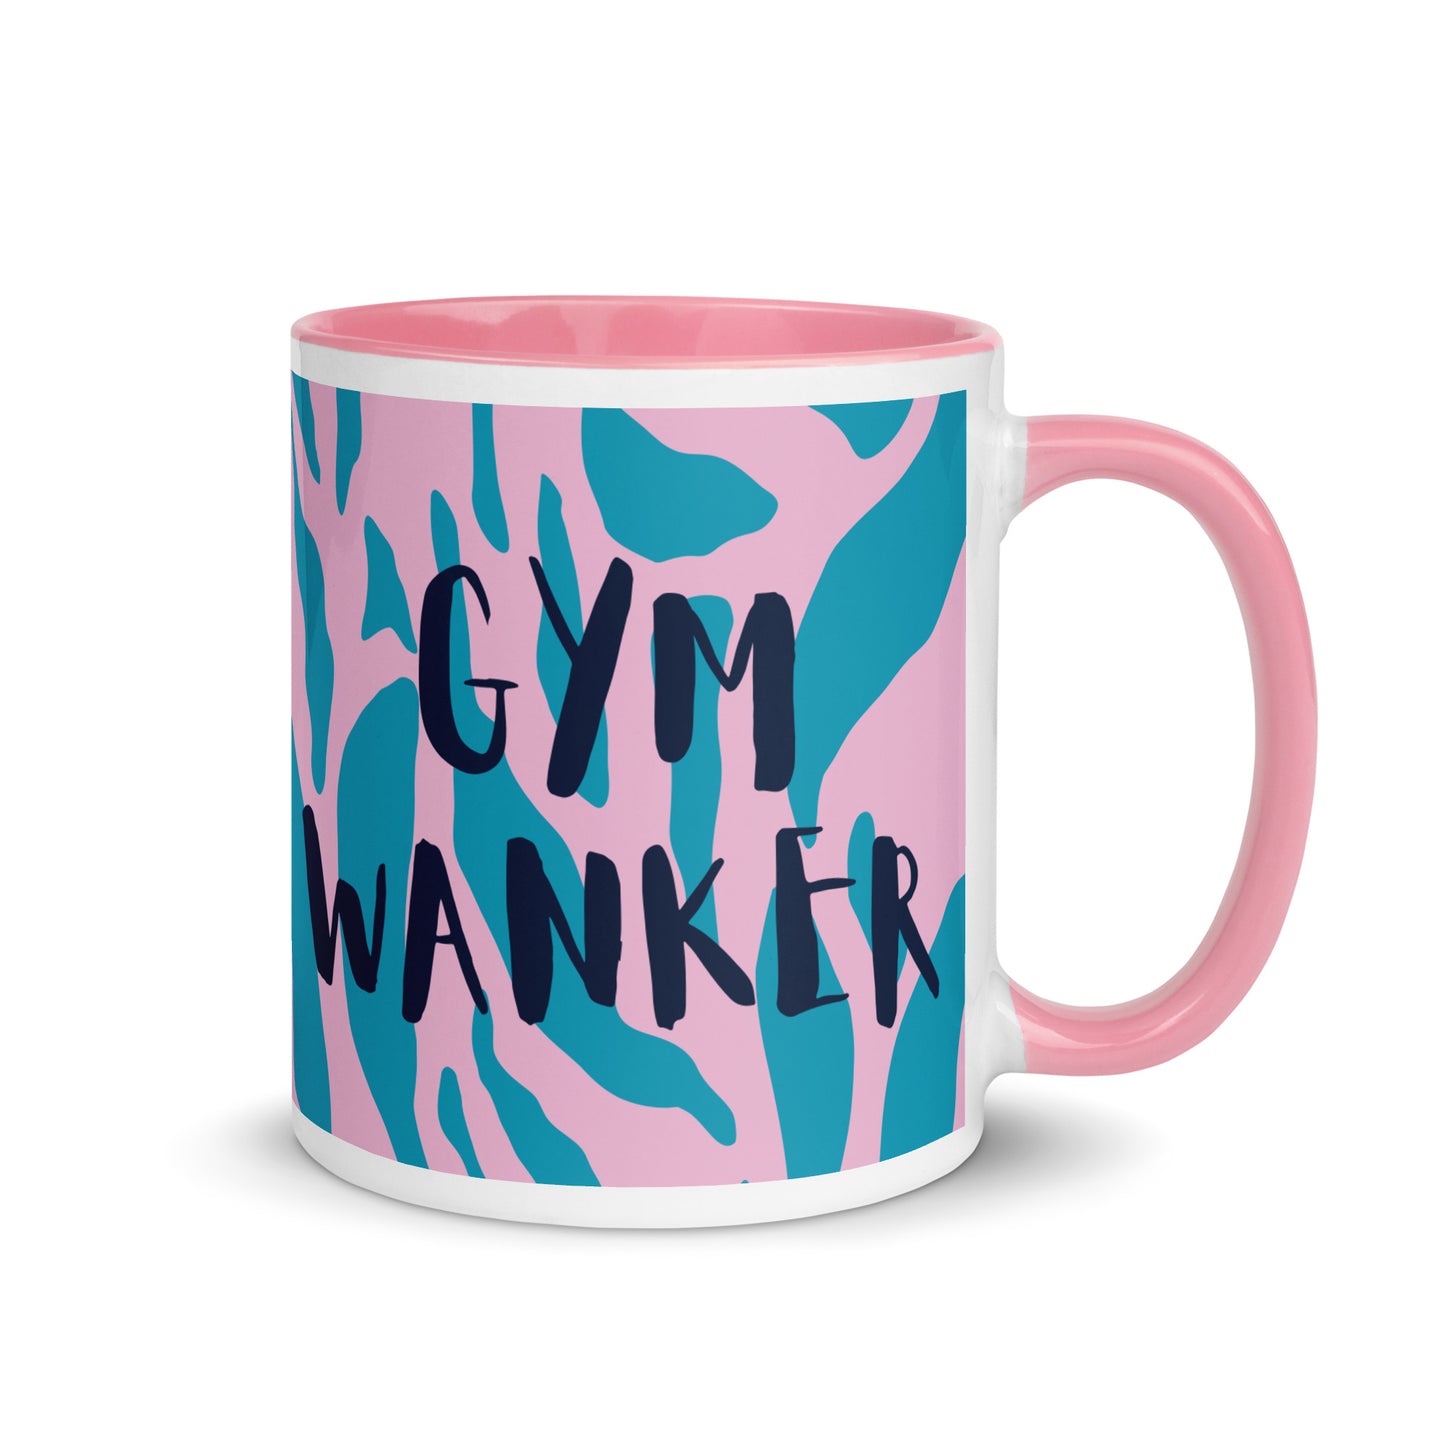 pink handled mug with gym wanker written across a blue and pink animal print background. a gift for people who love the gym